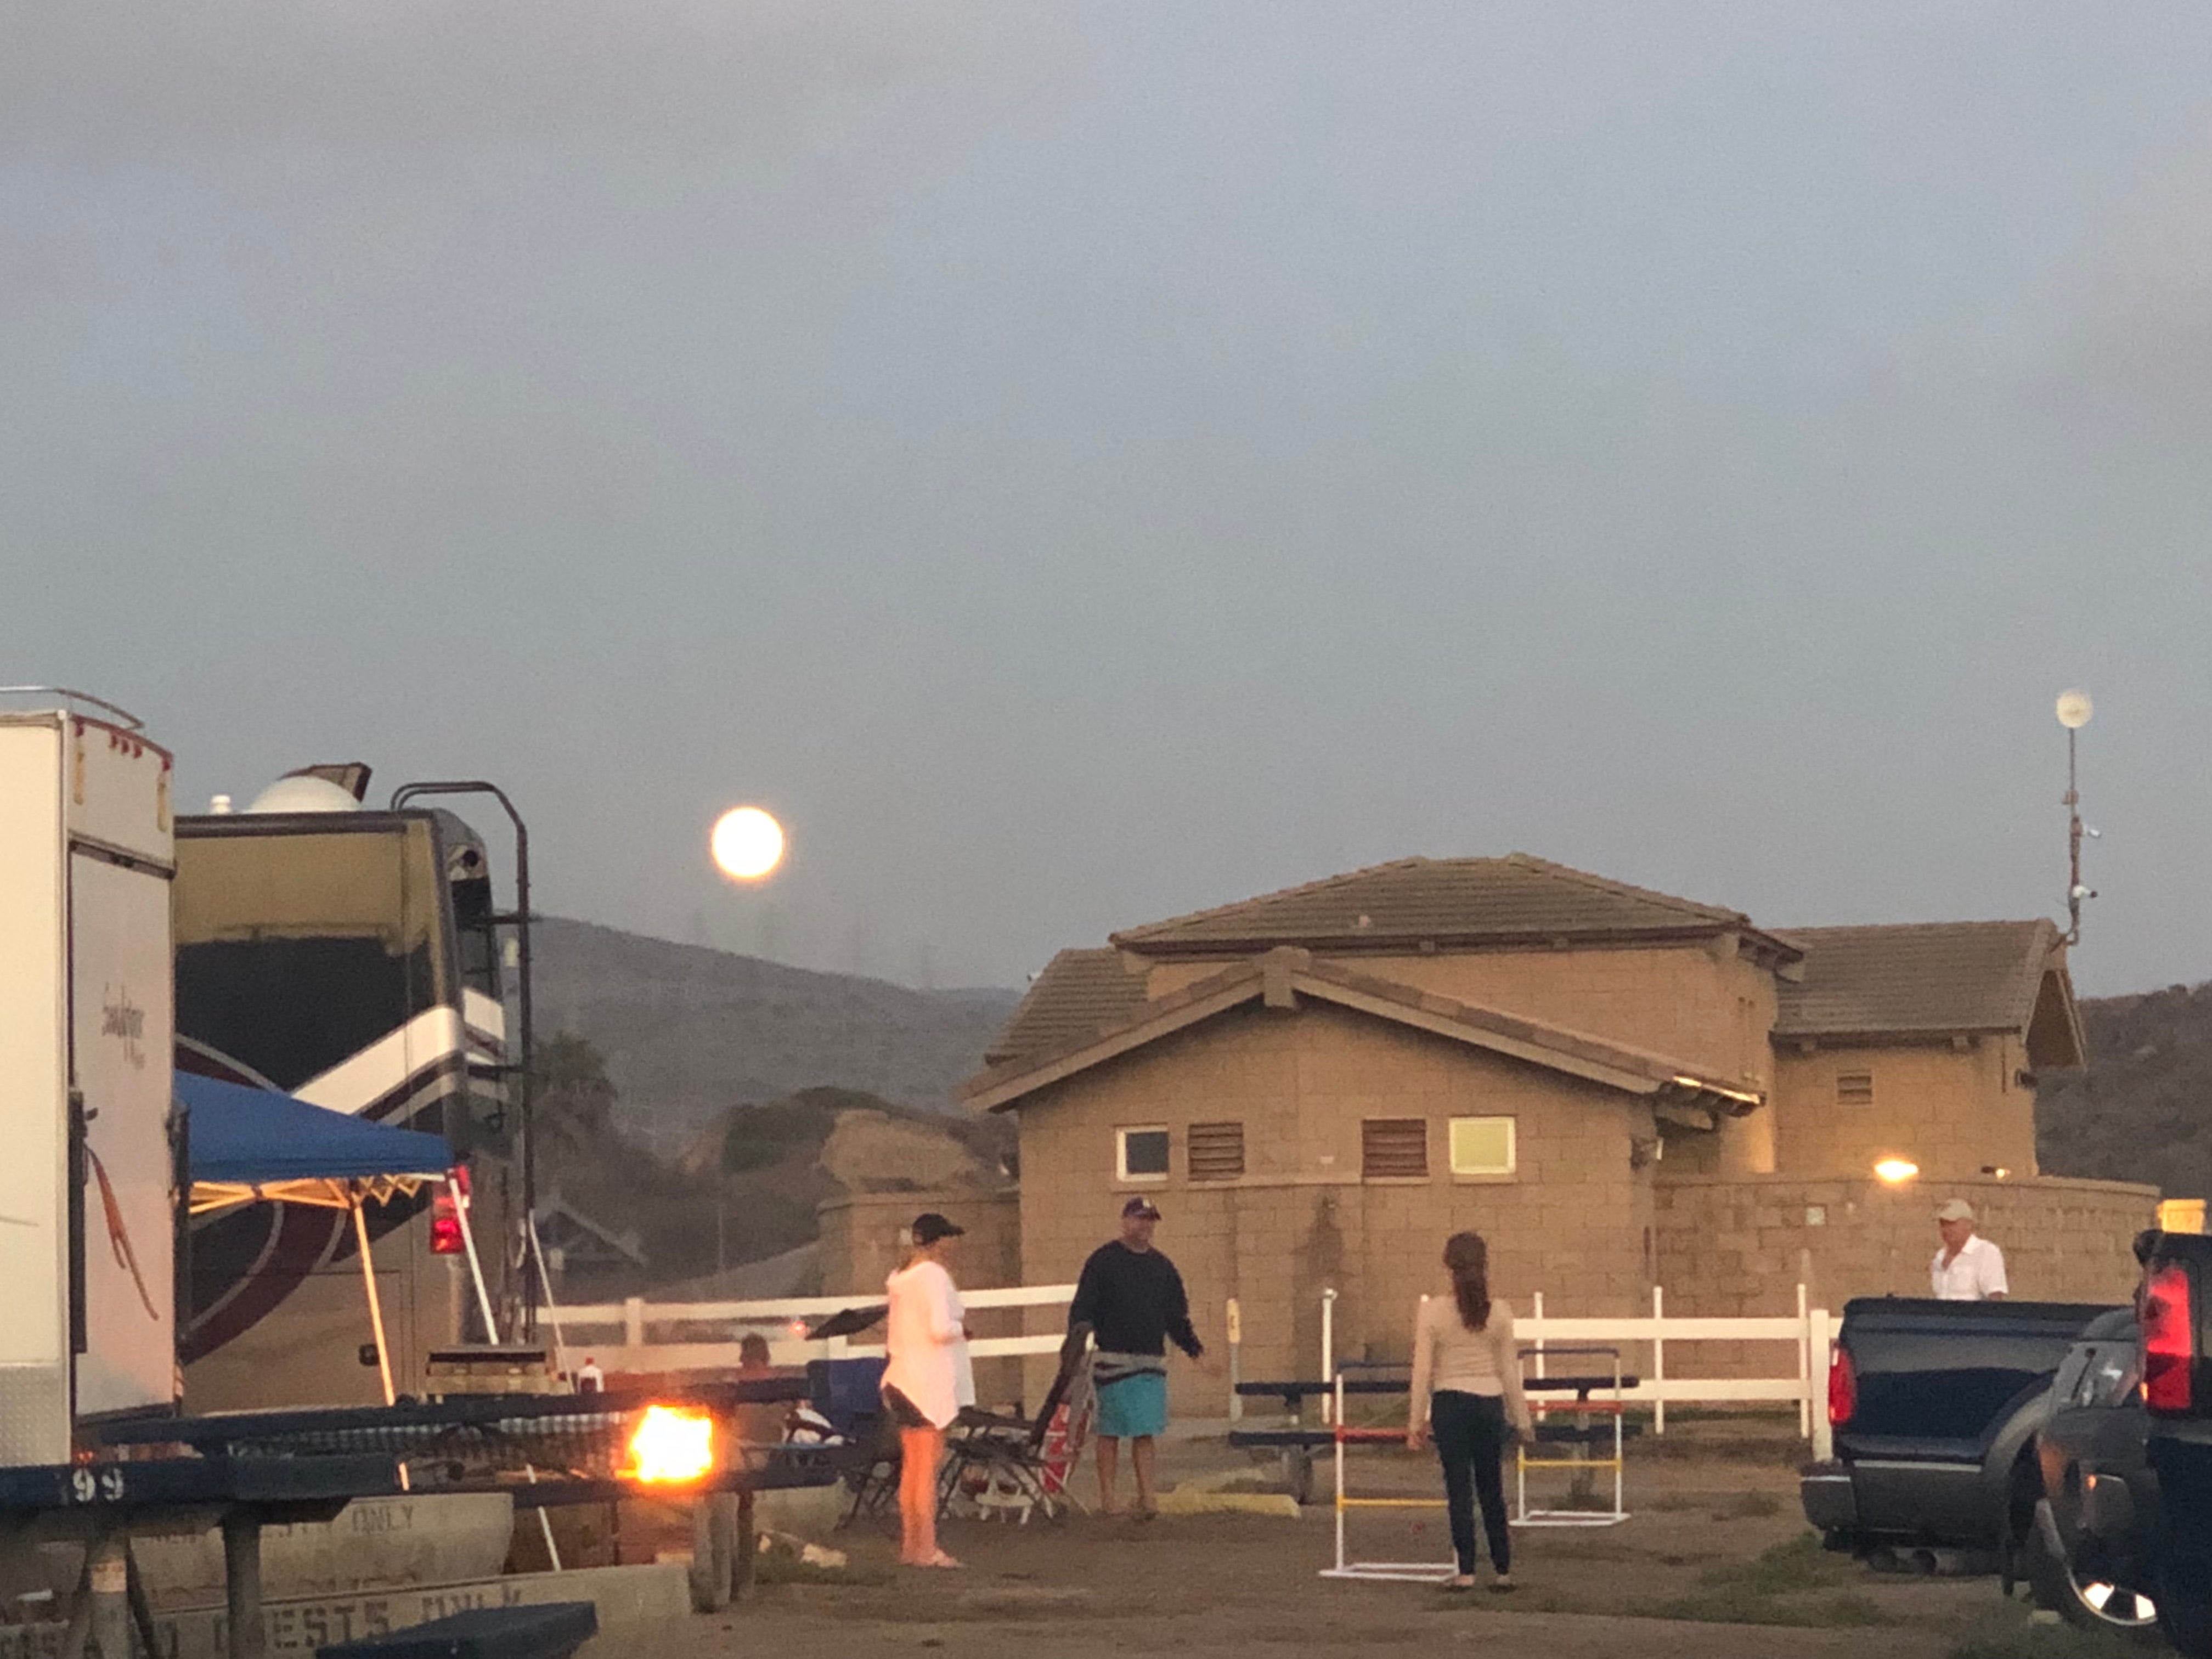 Cool moon with the bath house in the background.